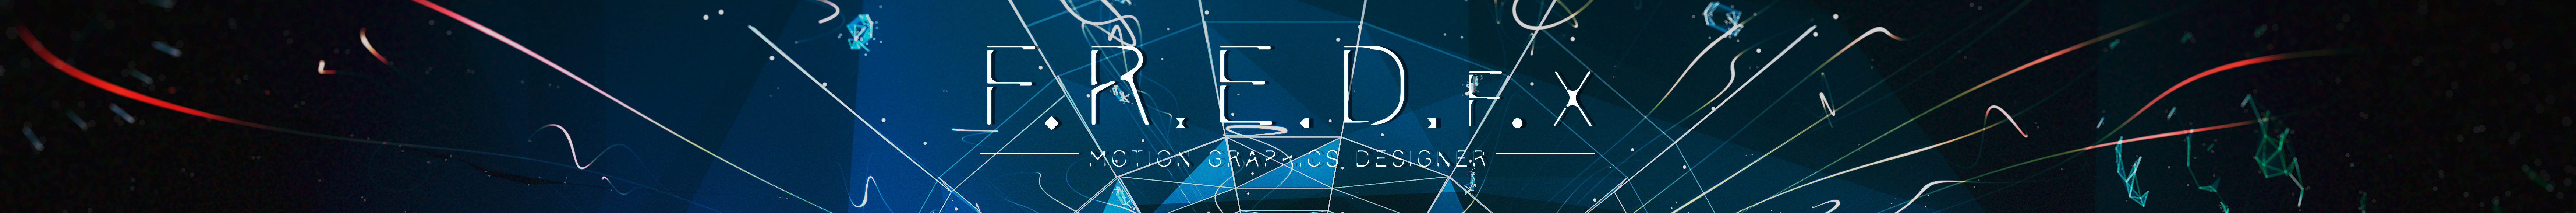 Fred Fx's profile banner